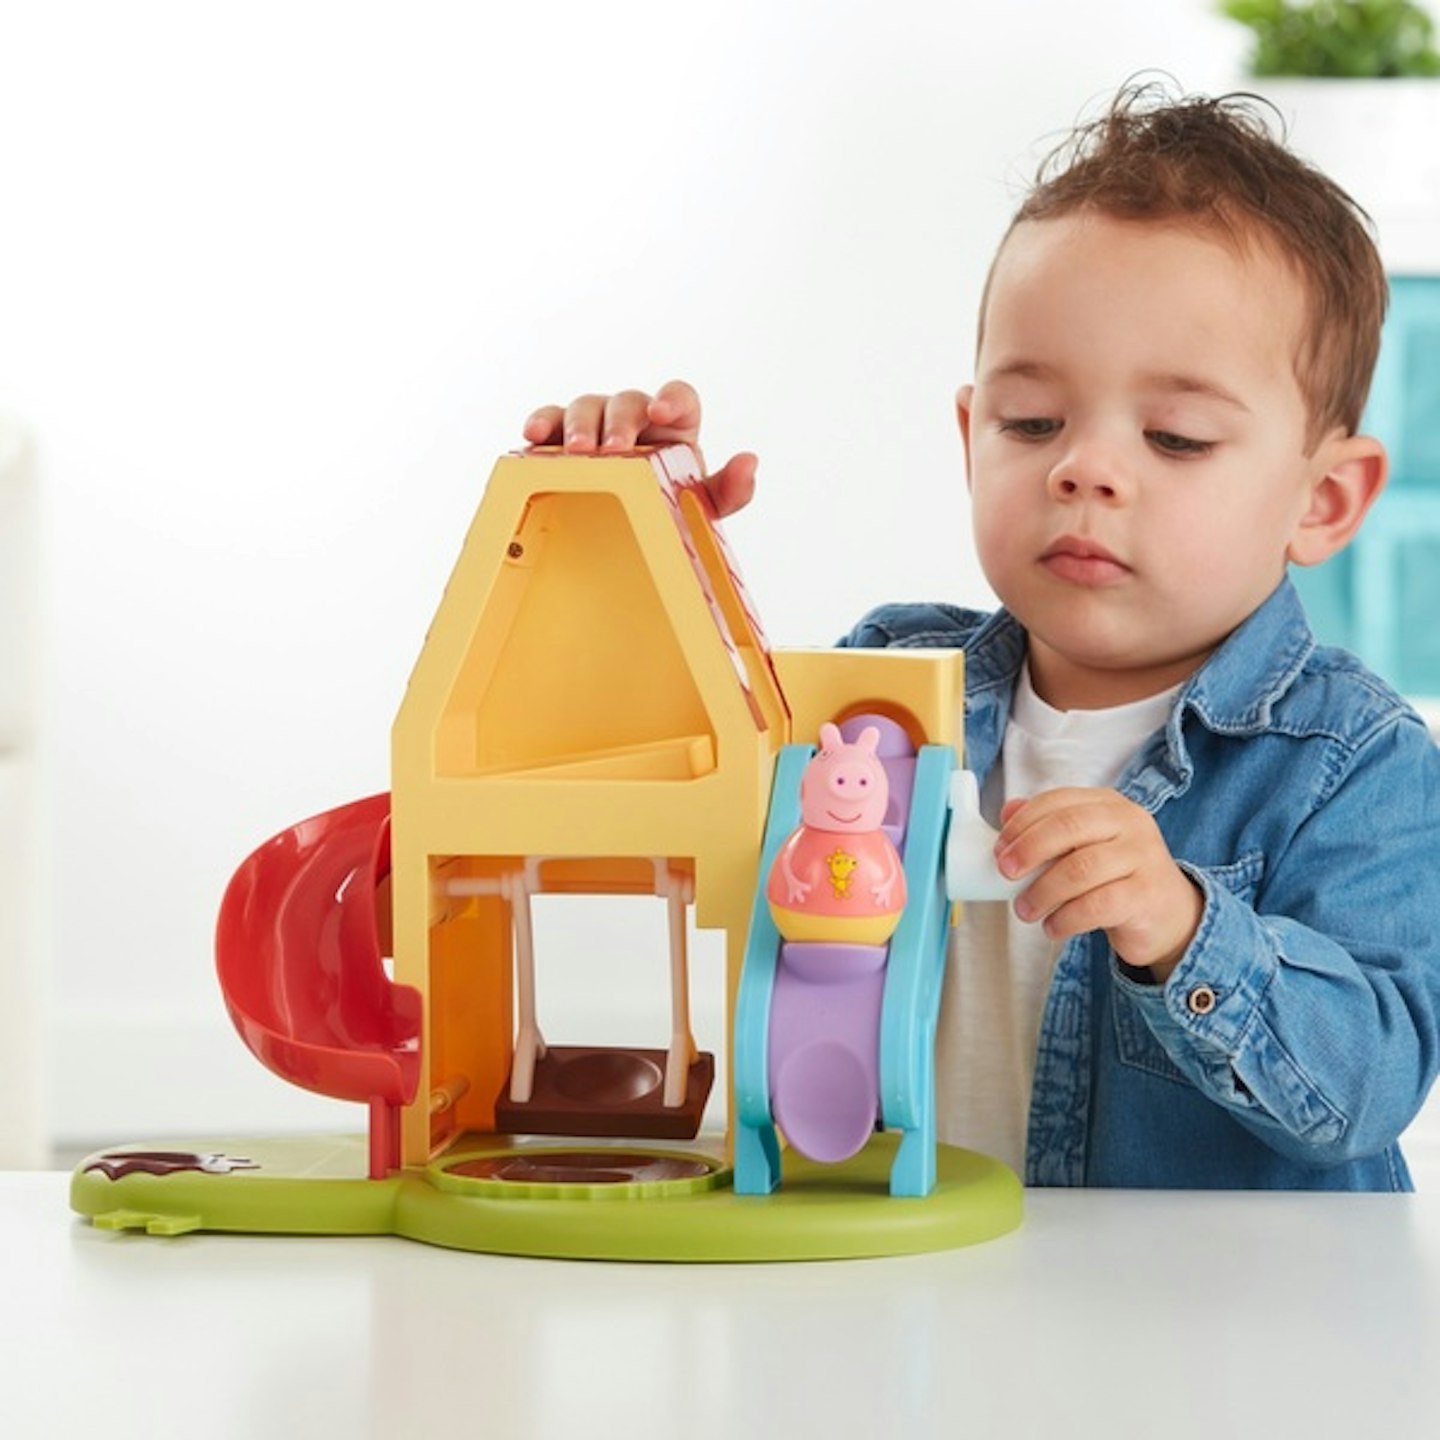 Peppa Pig Weebles Wind and Wobble Playhouse